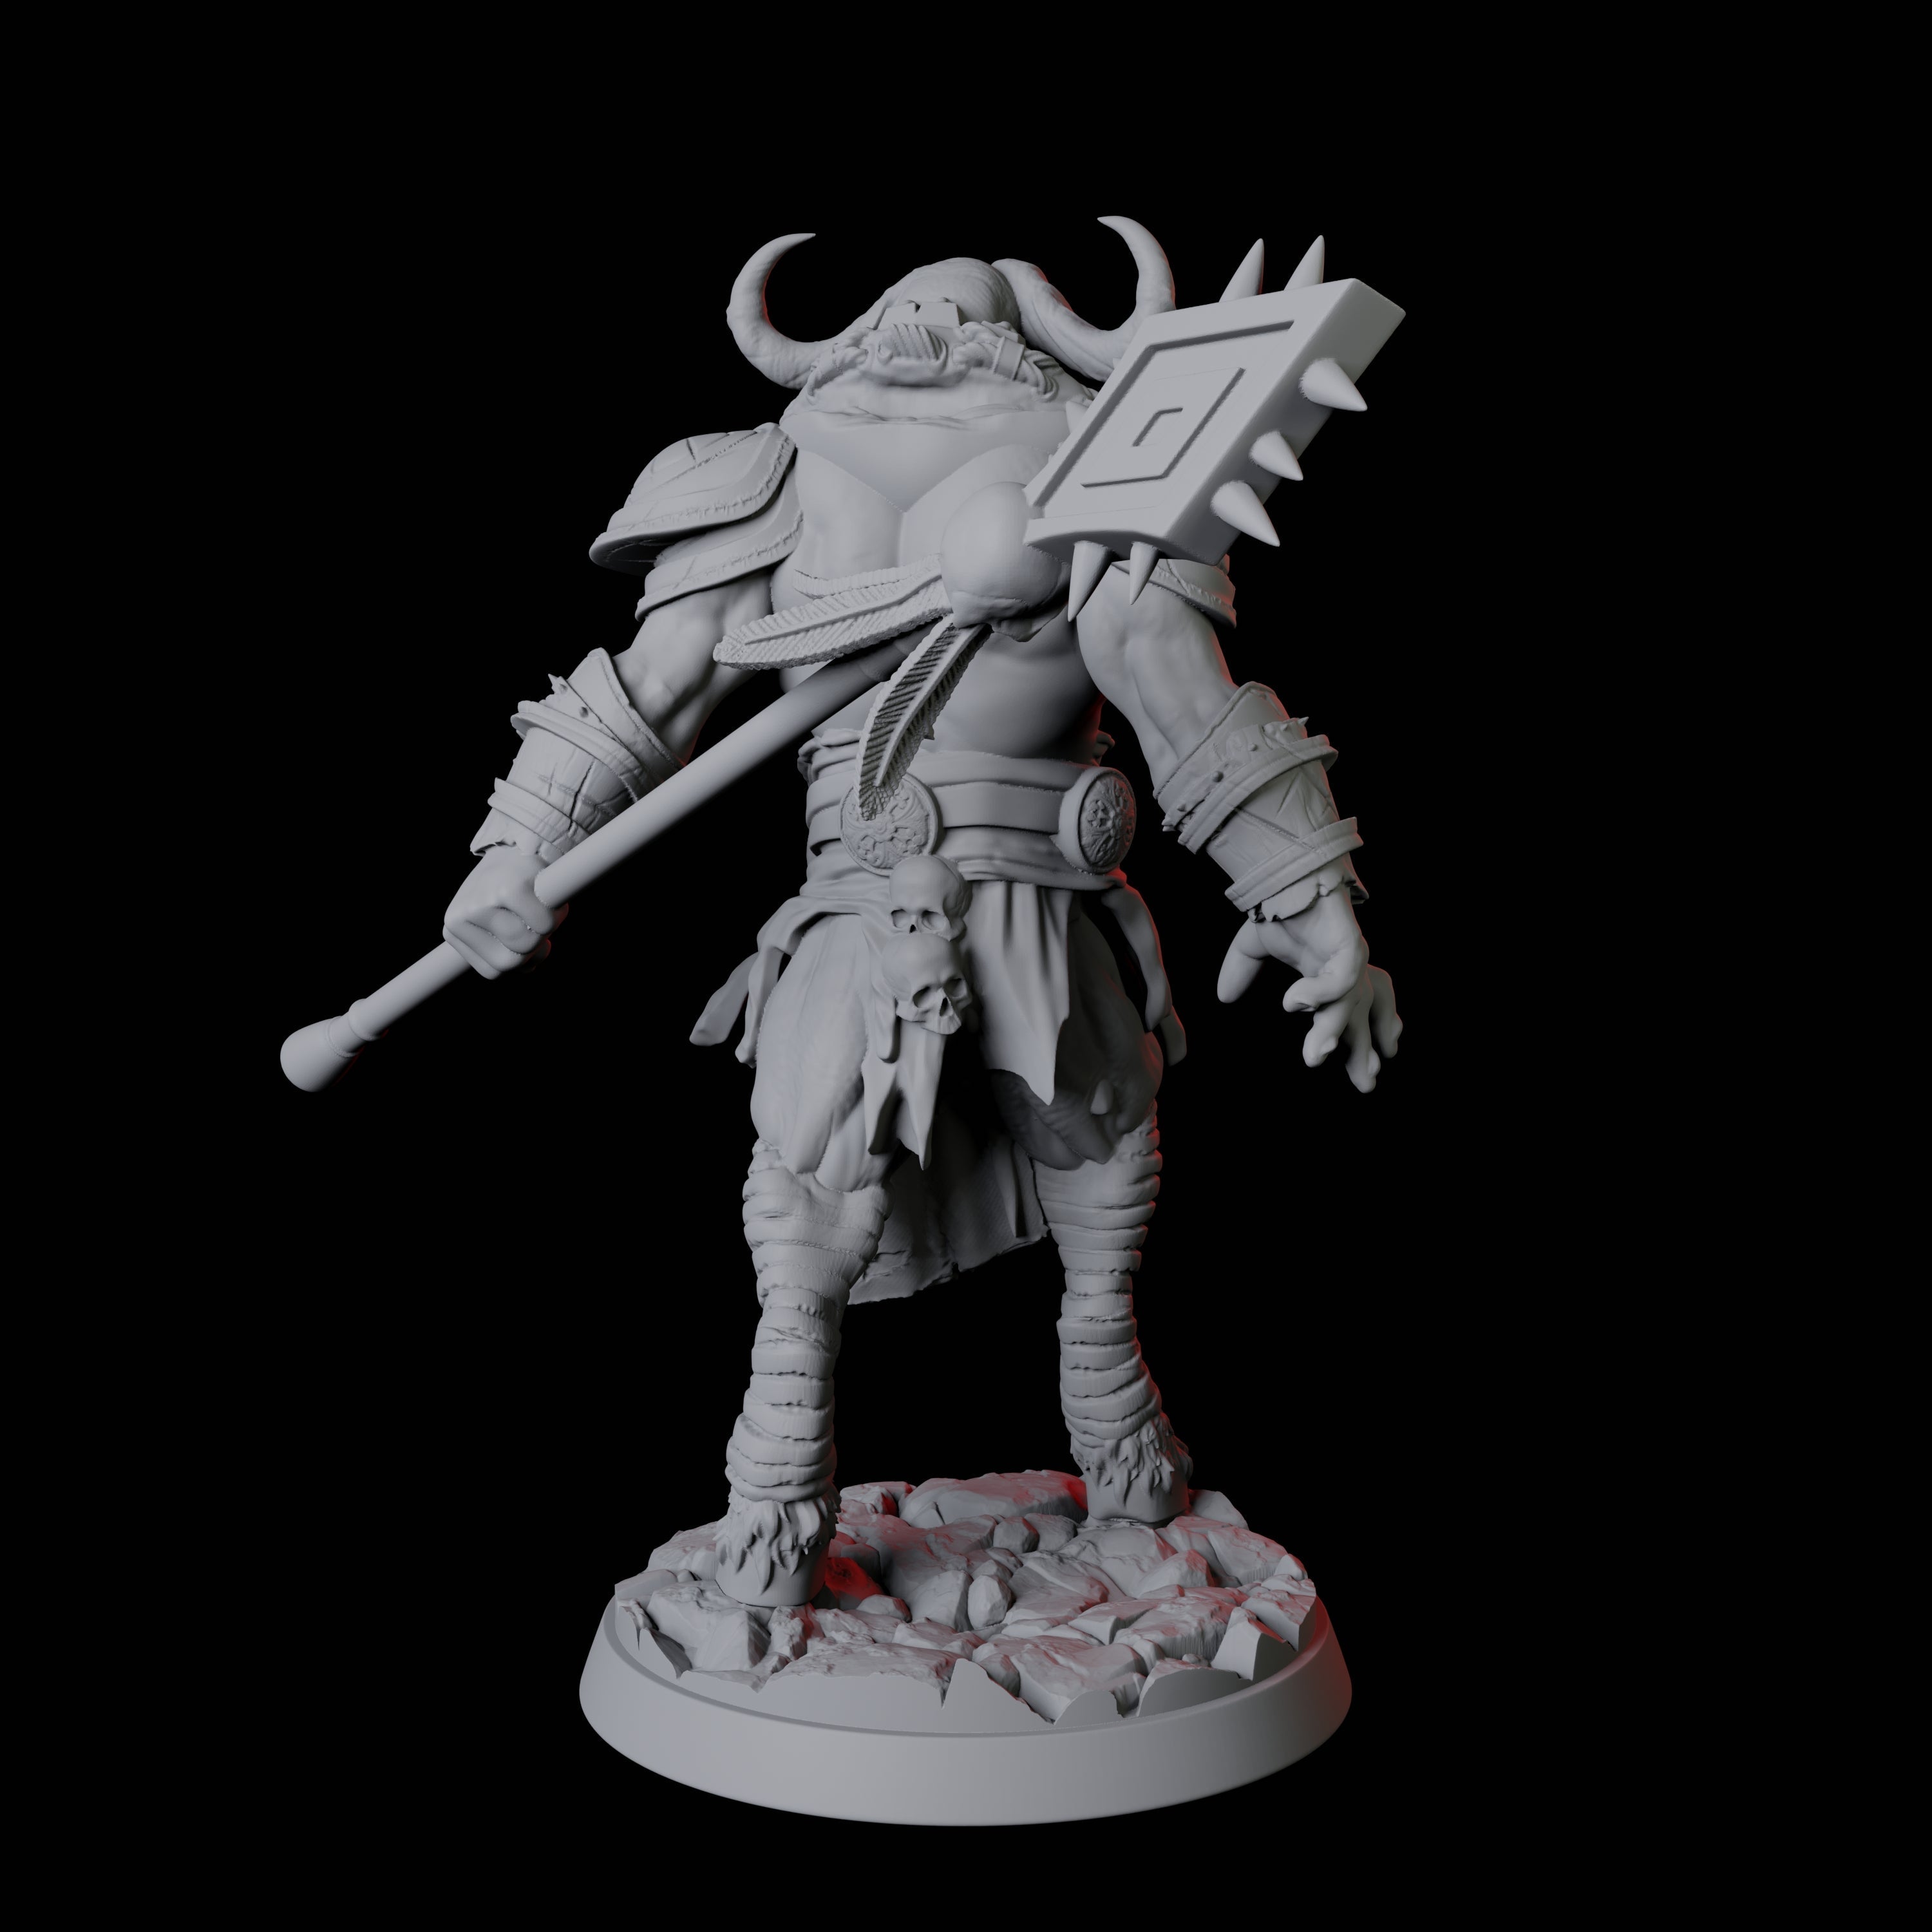 Muscular Yakfolk with Spear Miniature for Dungeons and Dragons, Pathfinder or other TTRPGs